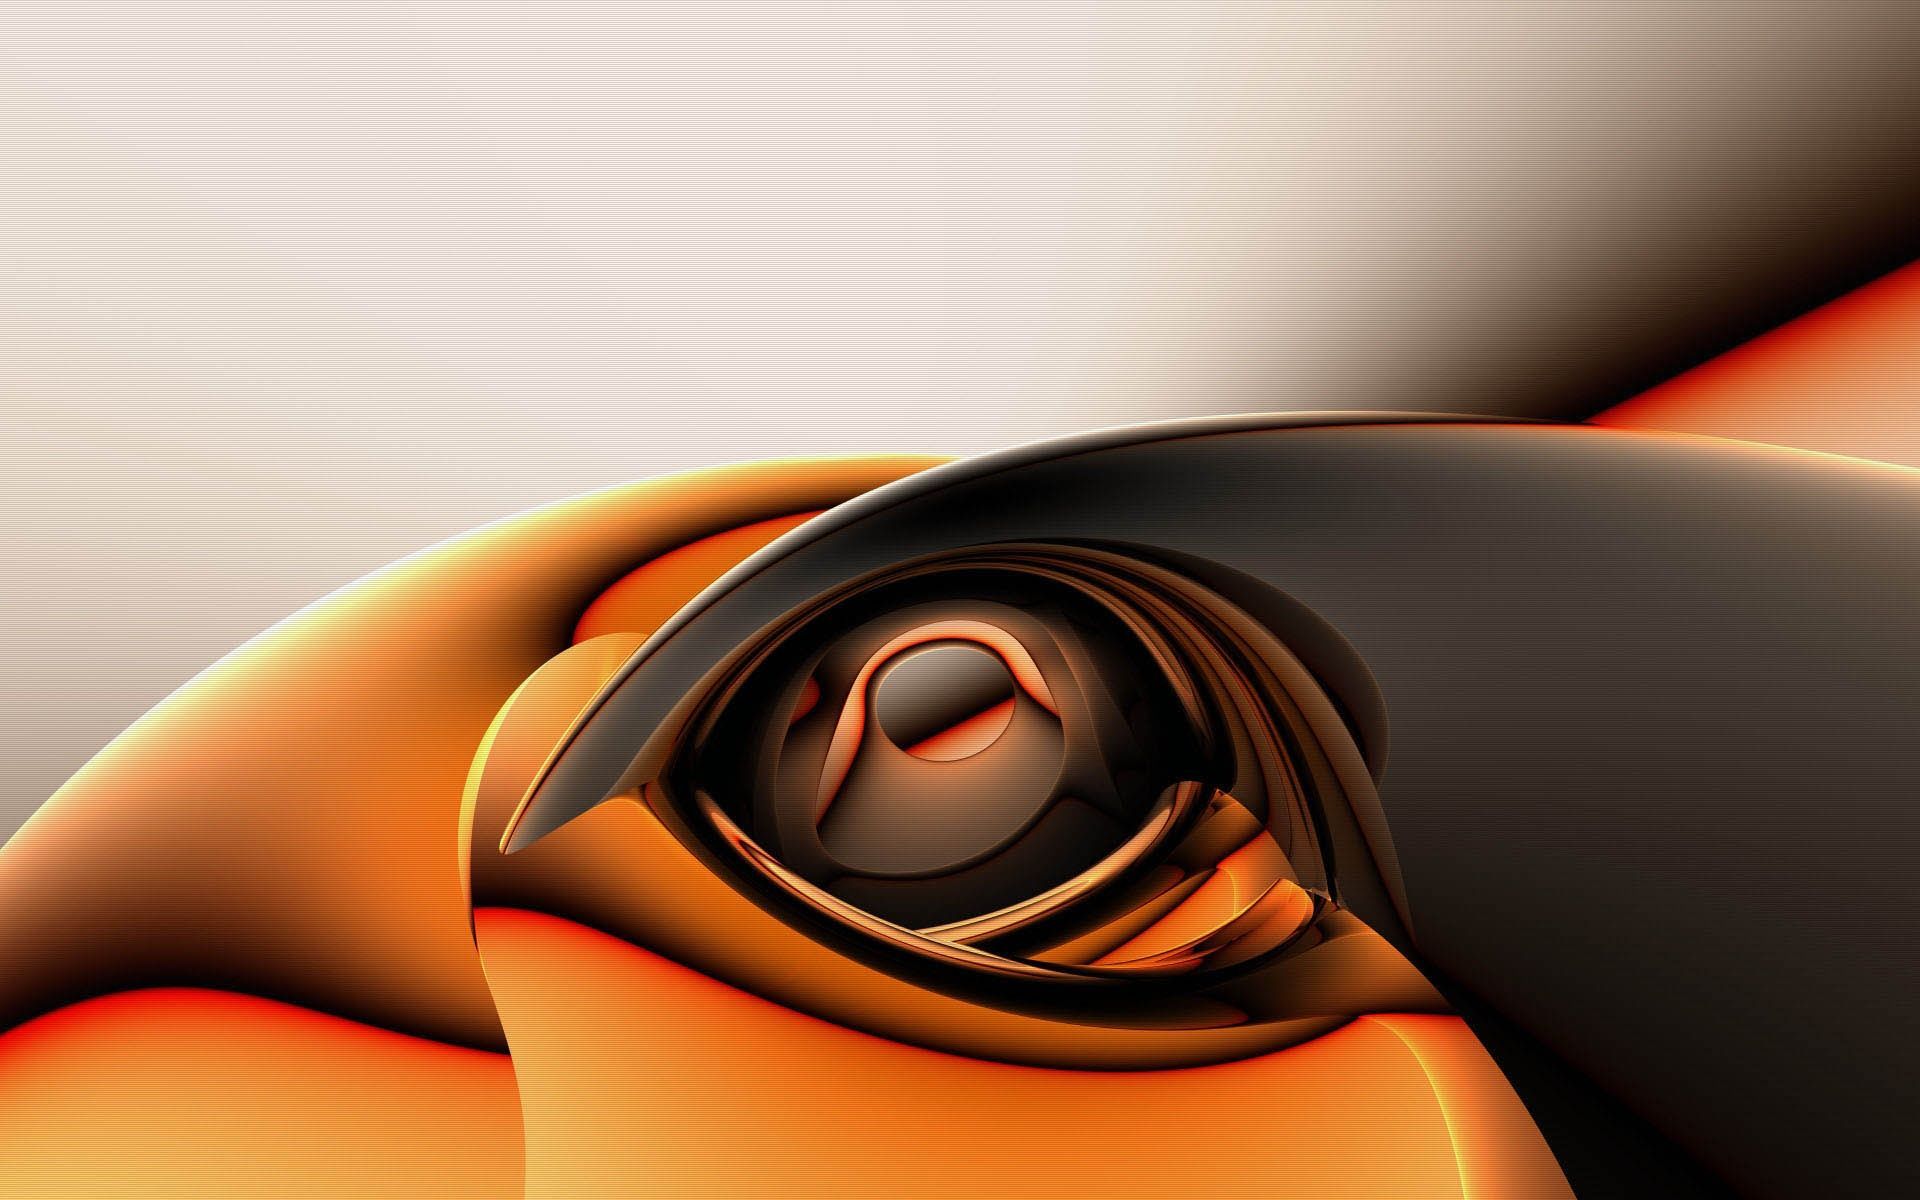 Abstract Creation In Orange And Black Wallpapers HD